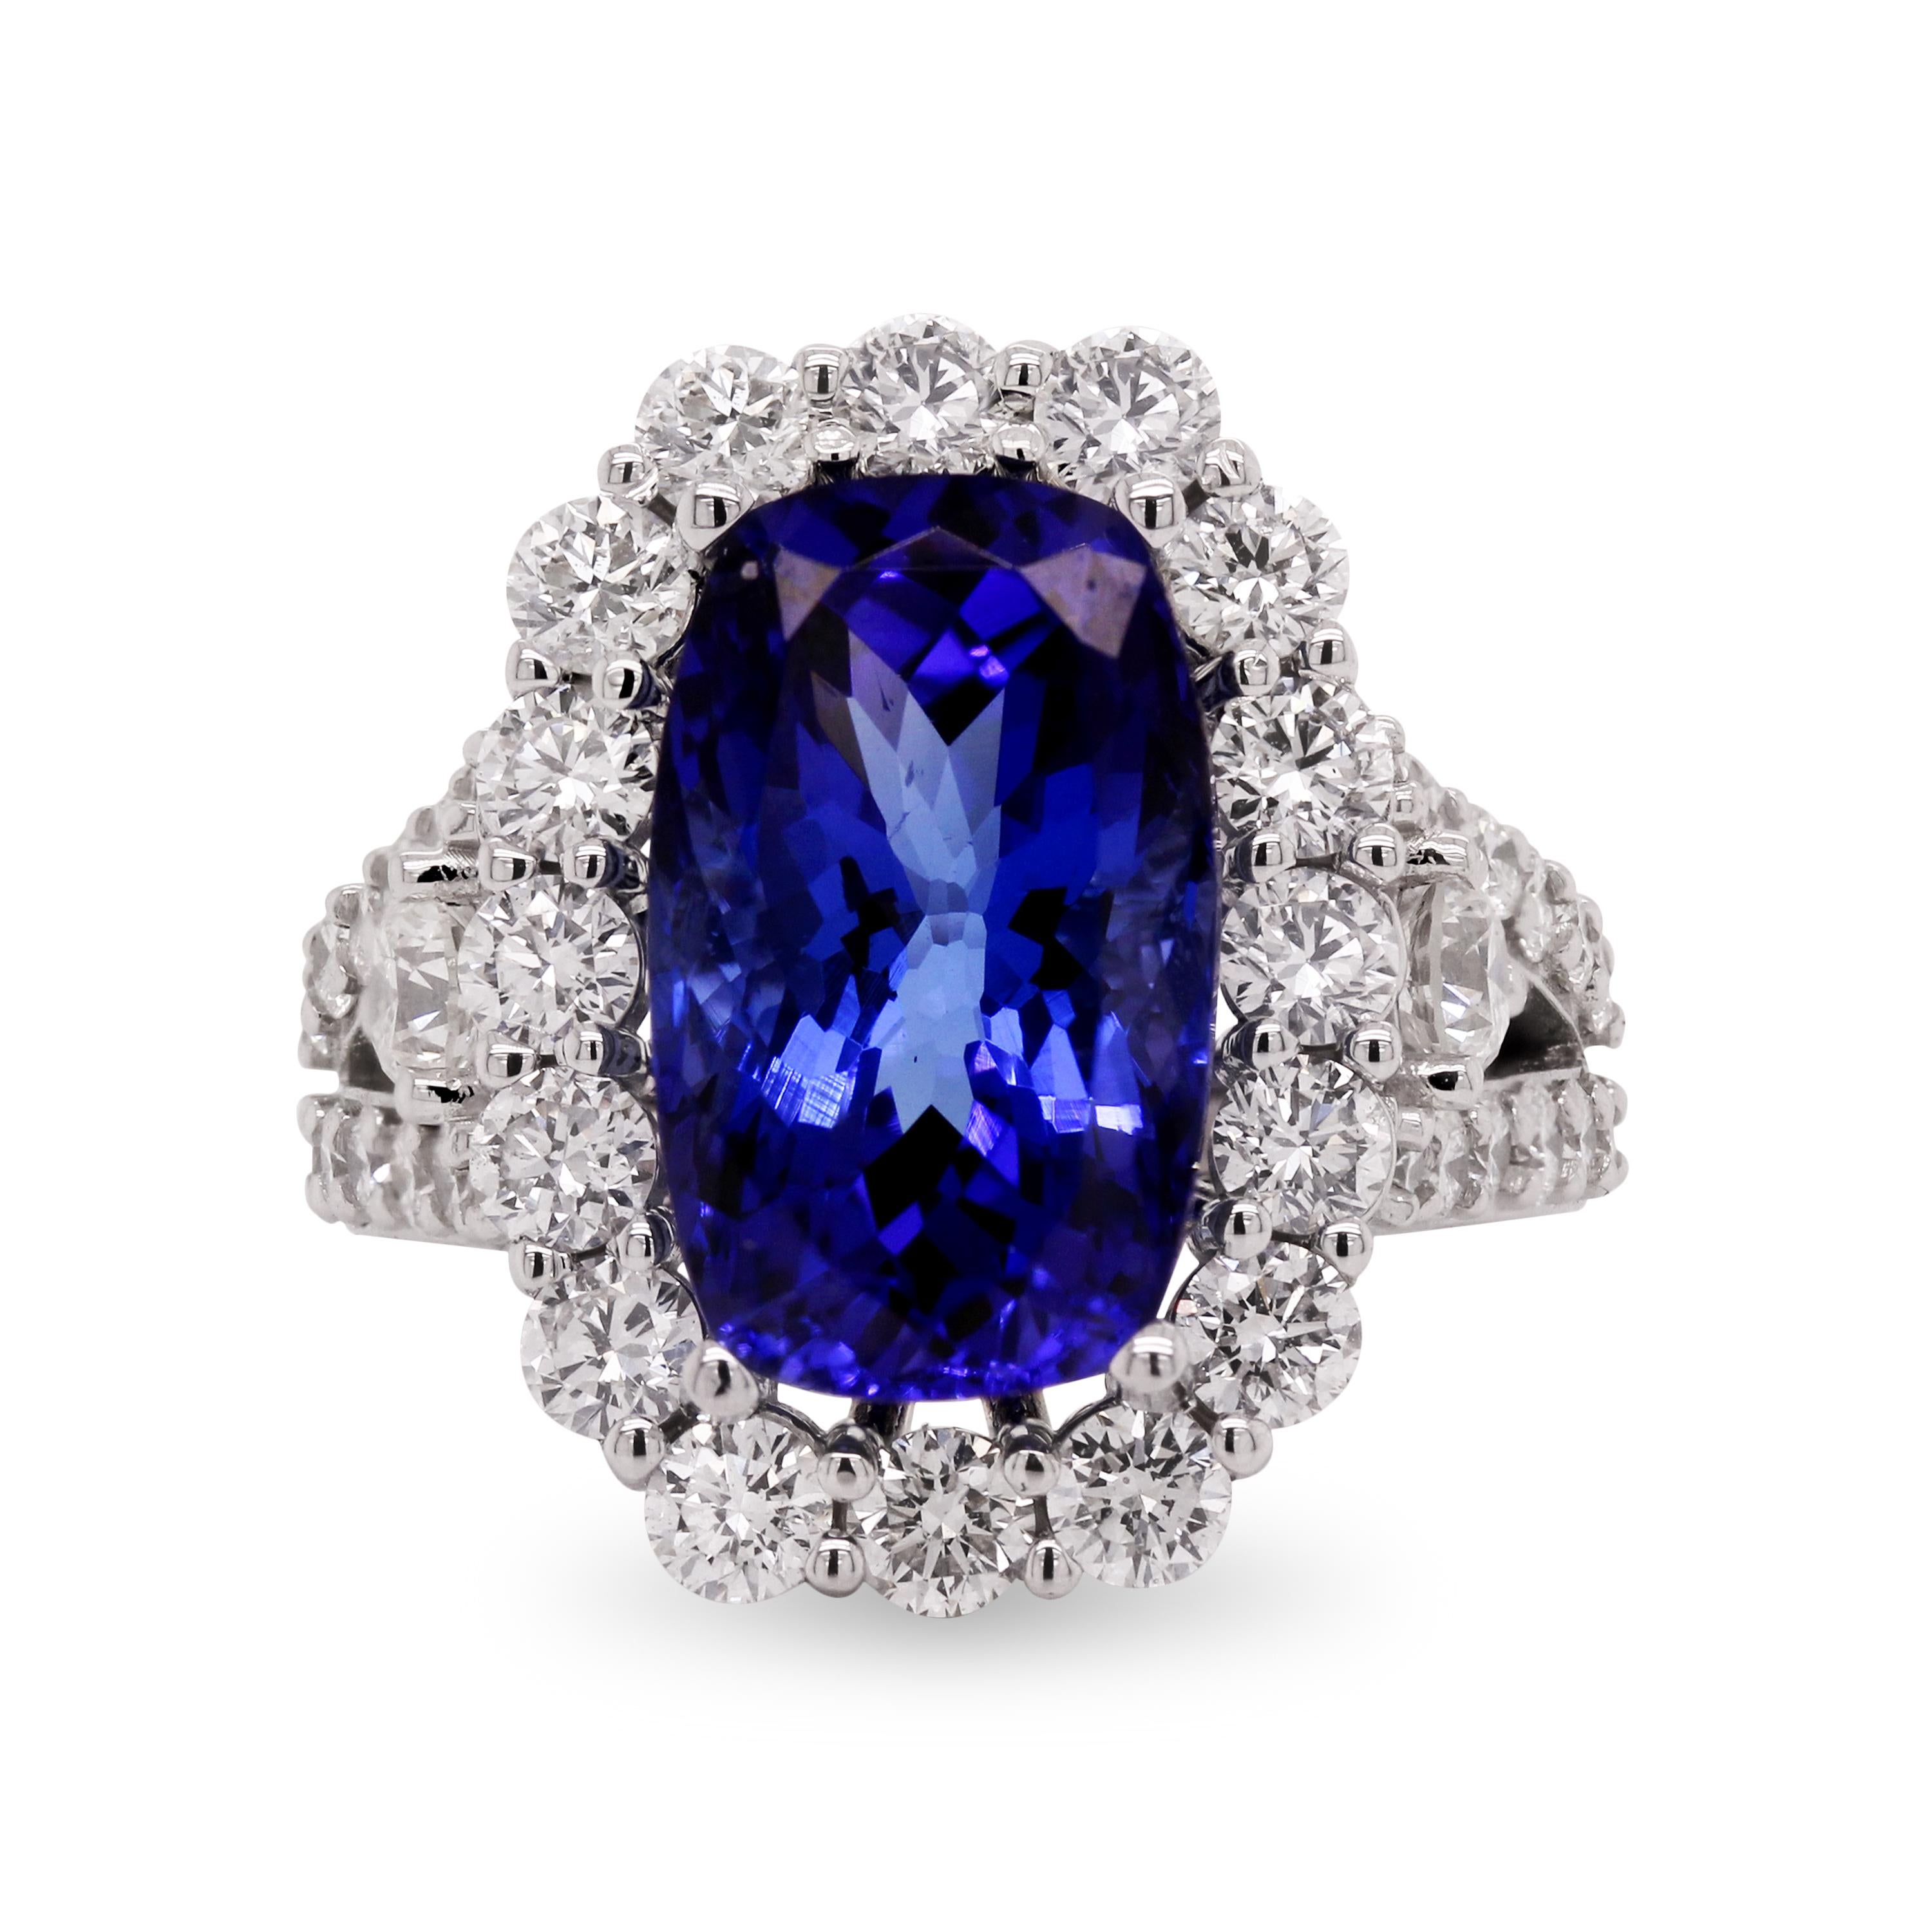 7.10 Carat Oval Cut 18 Karat White Gold Diamond Cocktail Ring

This beautiful ring features a vibrant, large Tanzanite center set in solid 18k white gold with diamonds all throughout.

7.10 carat Tanzanite center
3.45 carat G color, VS clarity